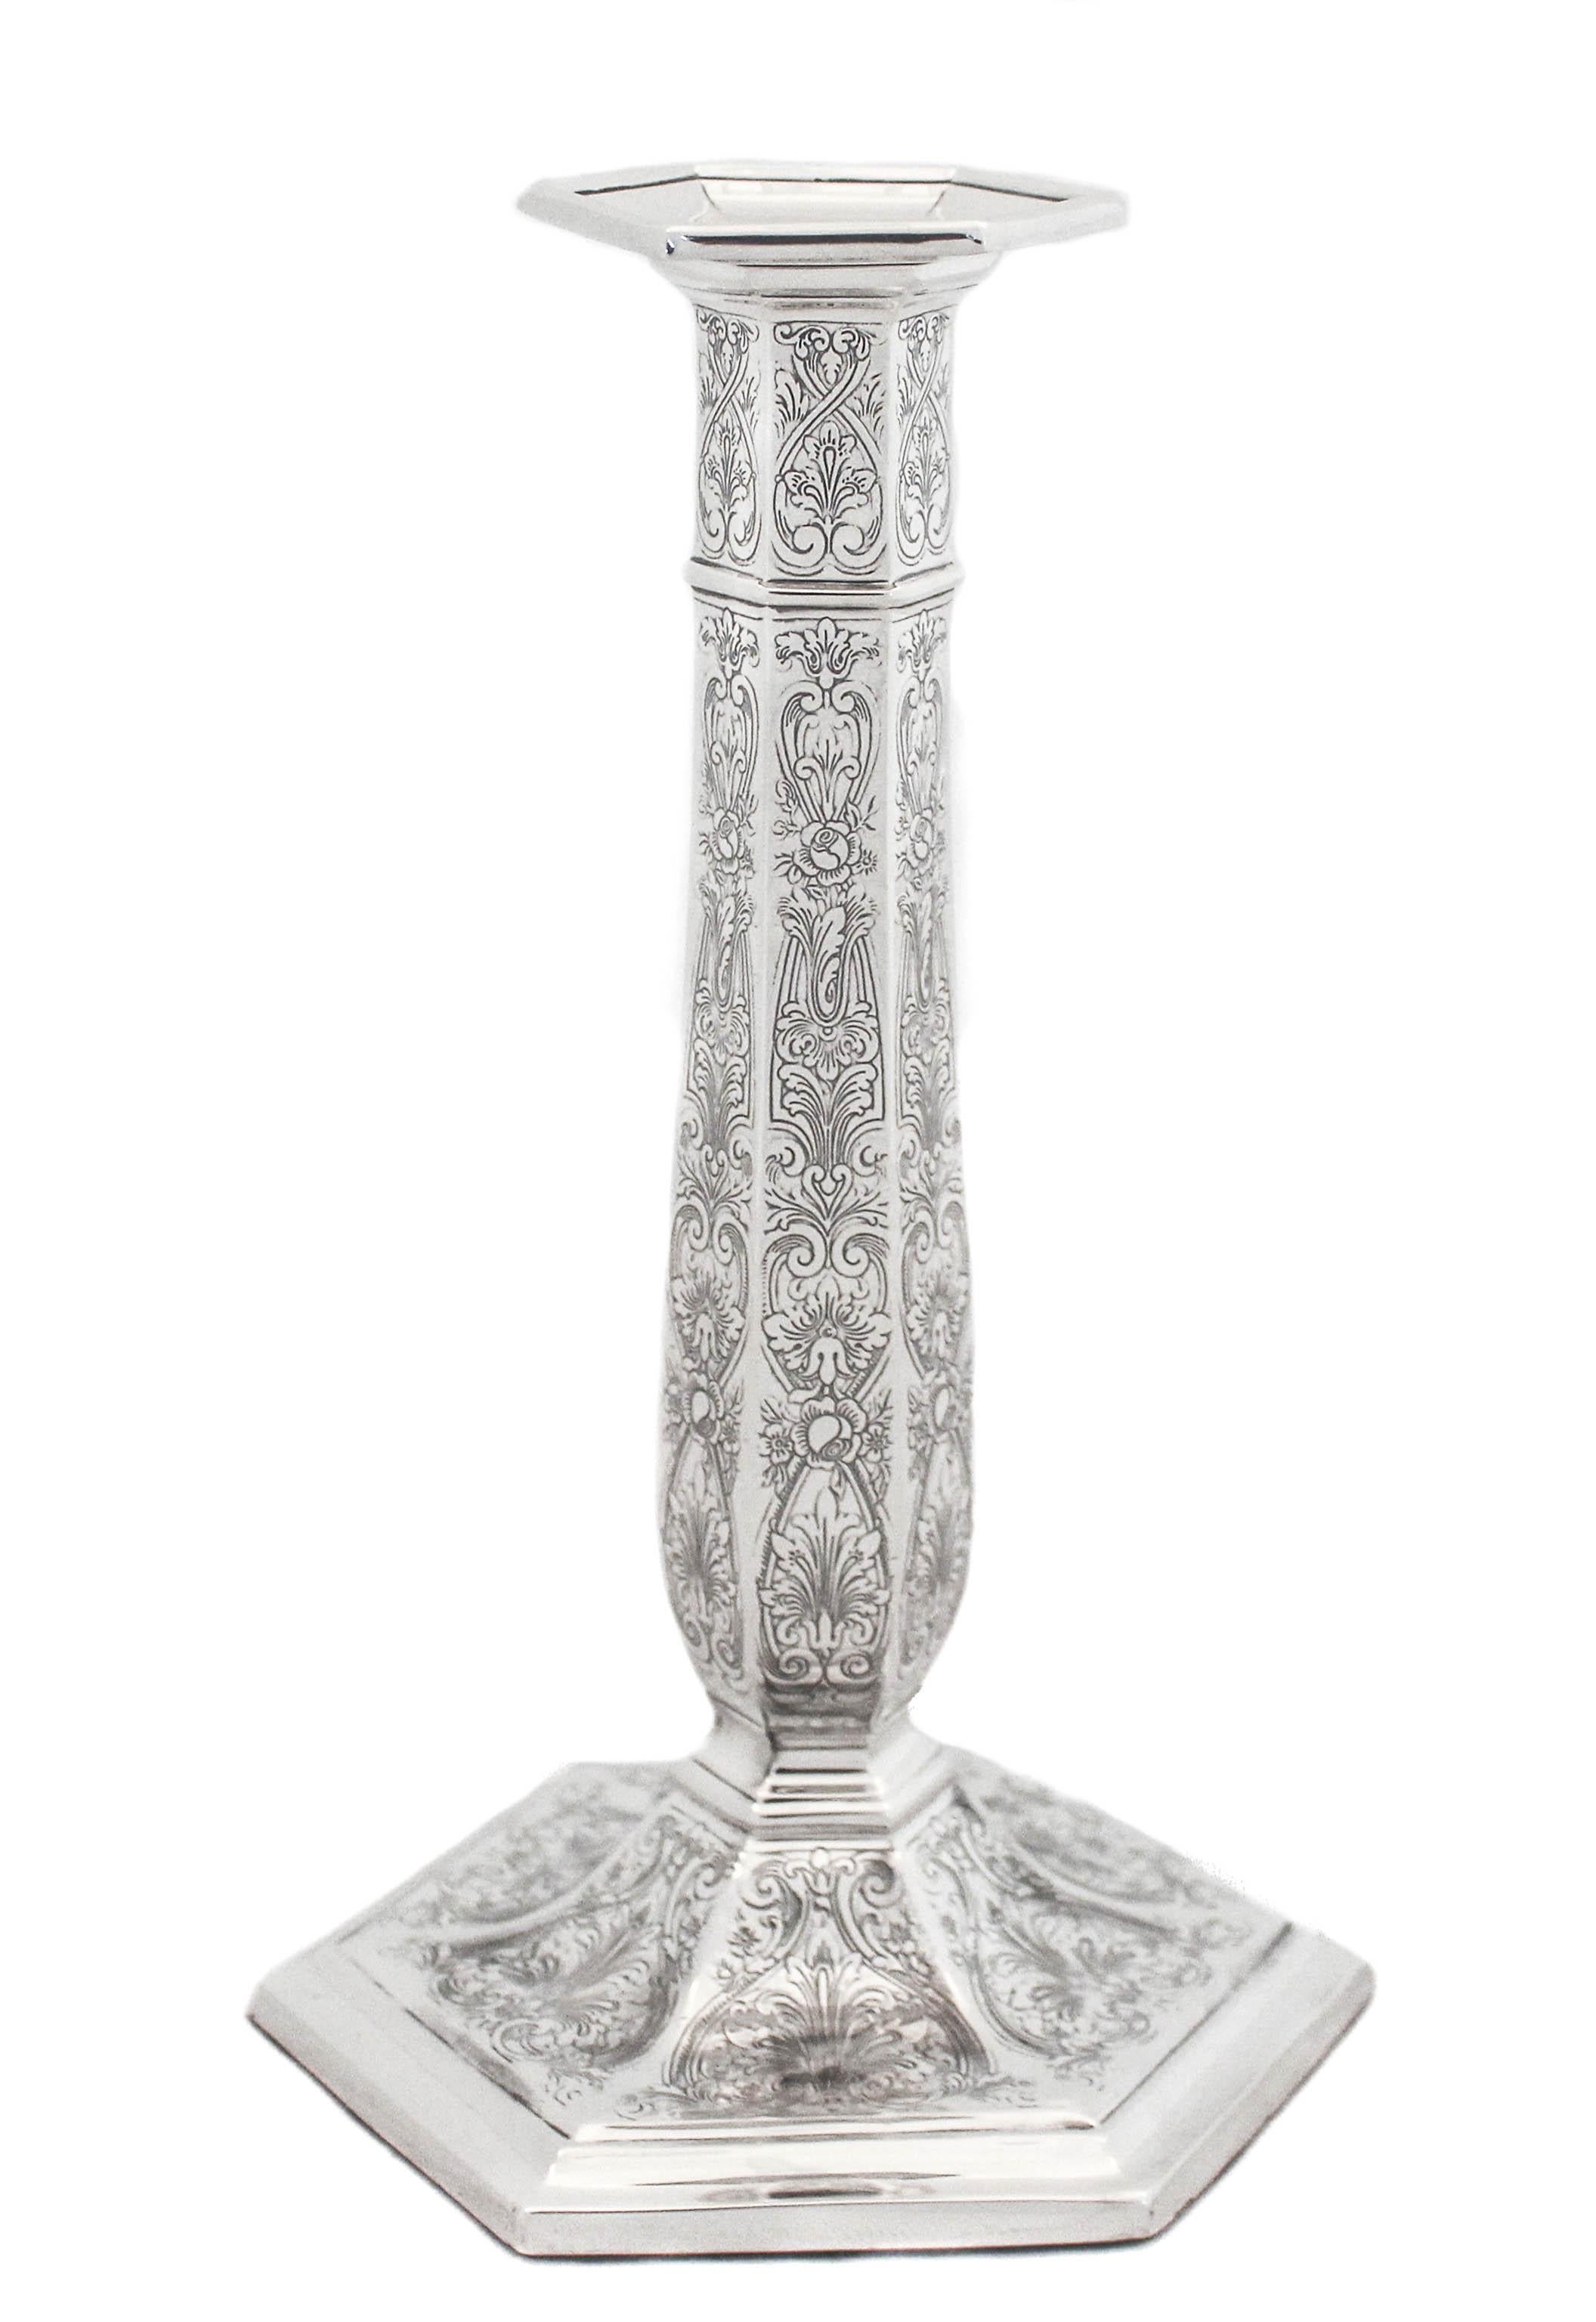 Being offered is a stunning pair of sterling silver candlesticks by Reed and Barton. The workmanship is simply breathtaking. Scrolls, fans, flowers and leaves come together in this design. All the etching around the base and along the body is in